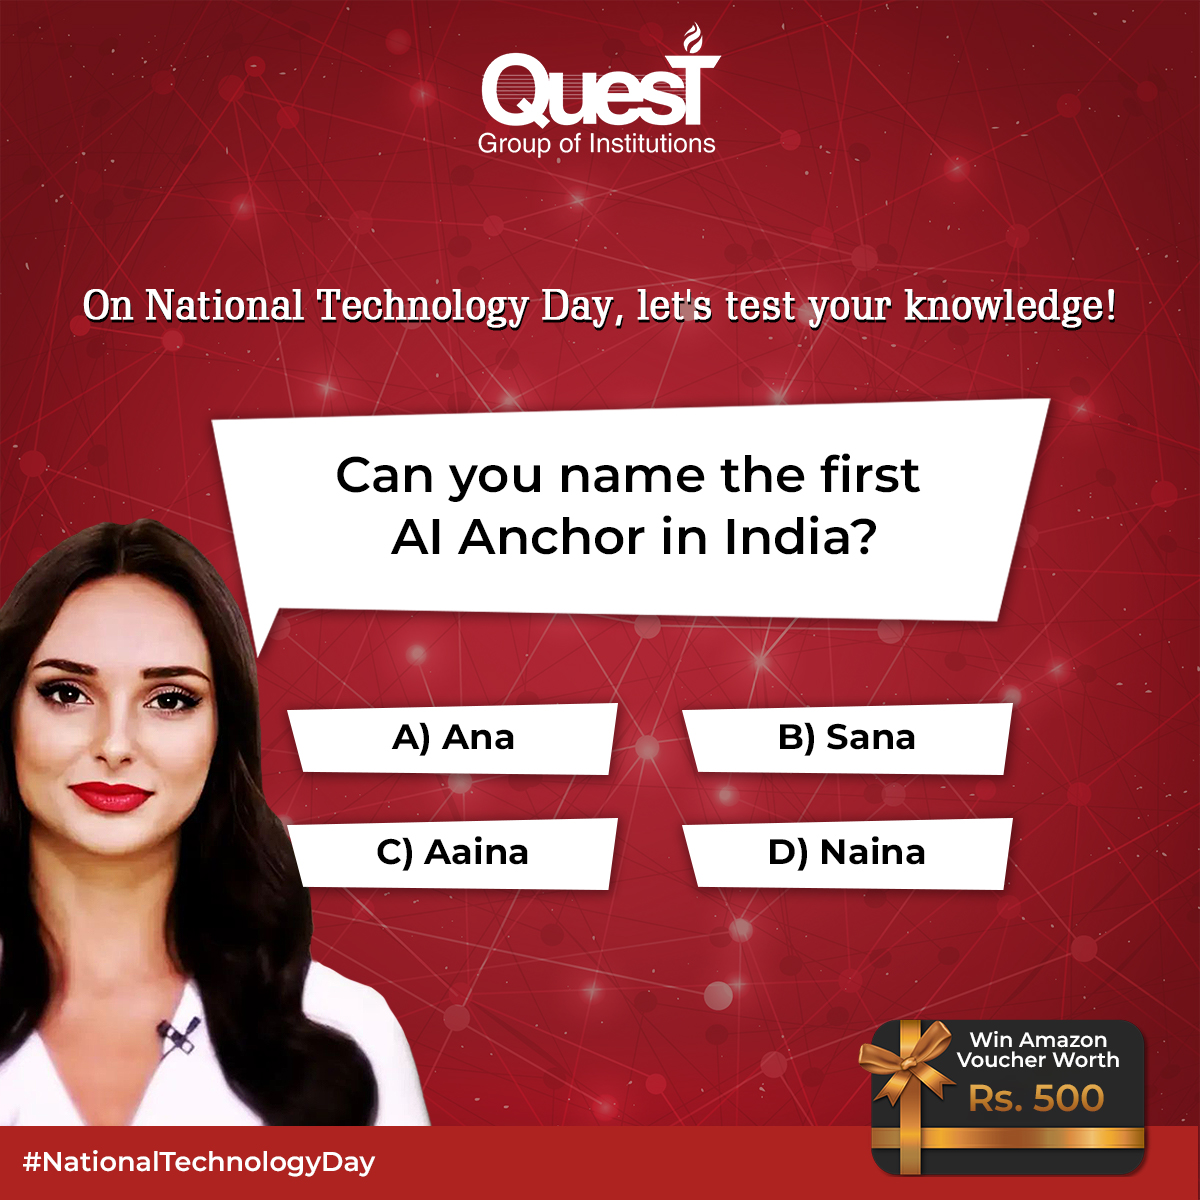 Use the hashtag hashtag#QuestContest along with your answer. 👥 Tag 3 friends asking them to participate. ⏰ The contest closes on 17.05.24 (10:00 PM). 🏆 The winners will be declared on a lucky draw basis. #NationalTechnologyDay #ContestAlert #Quest